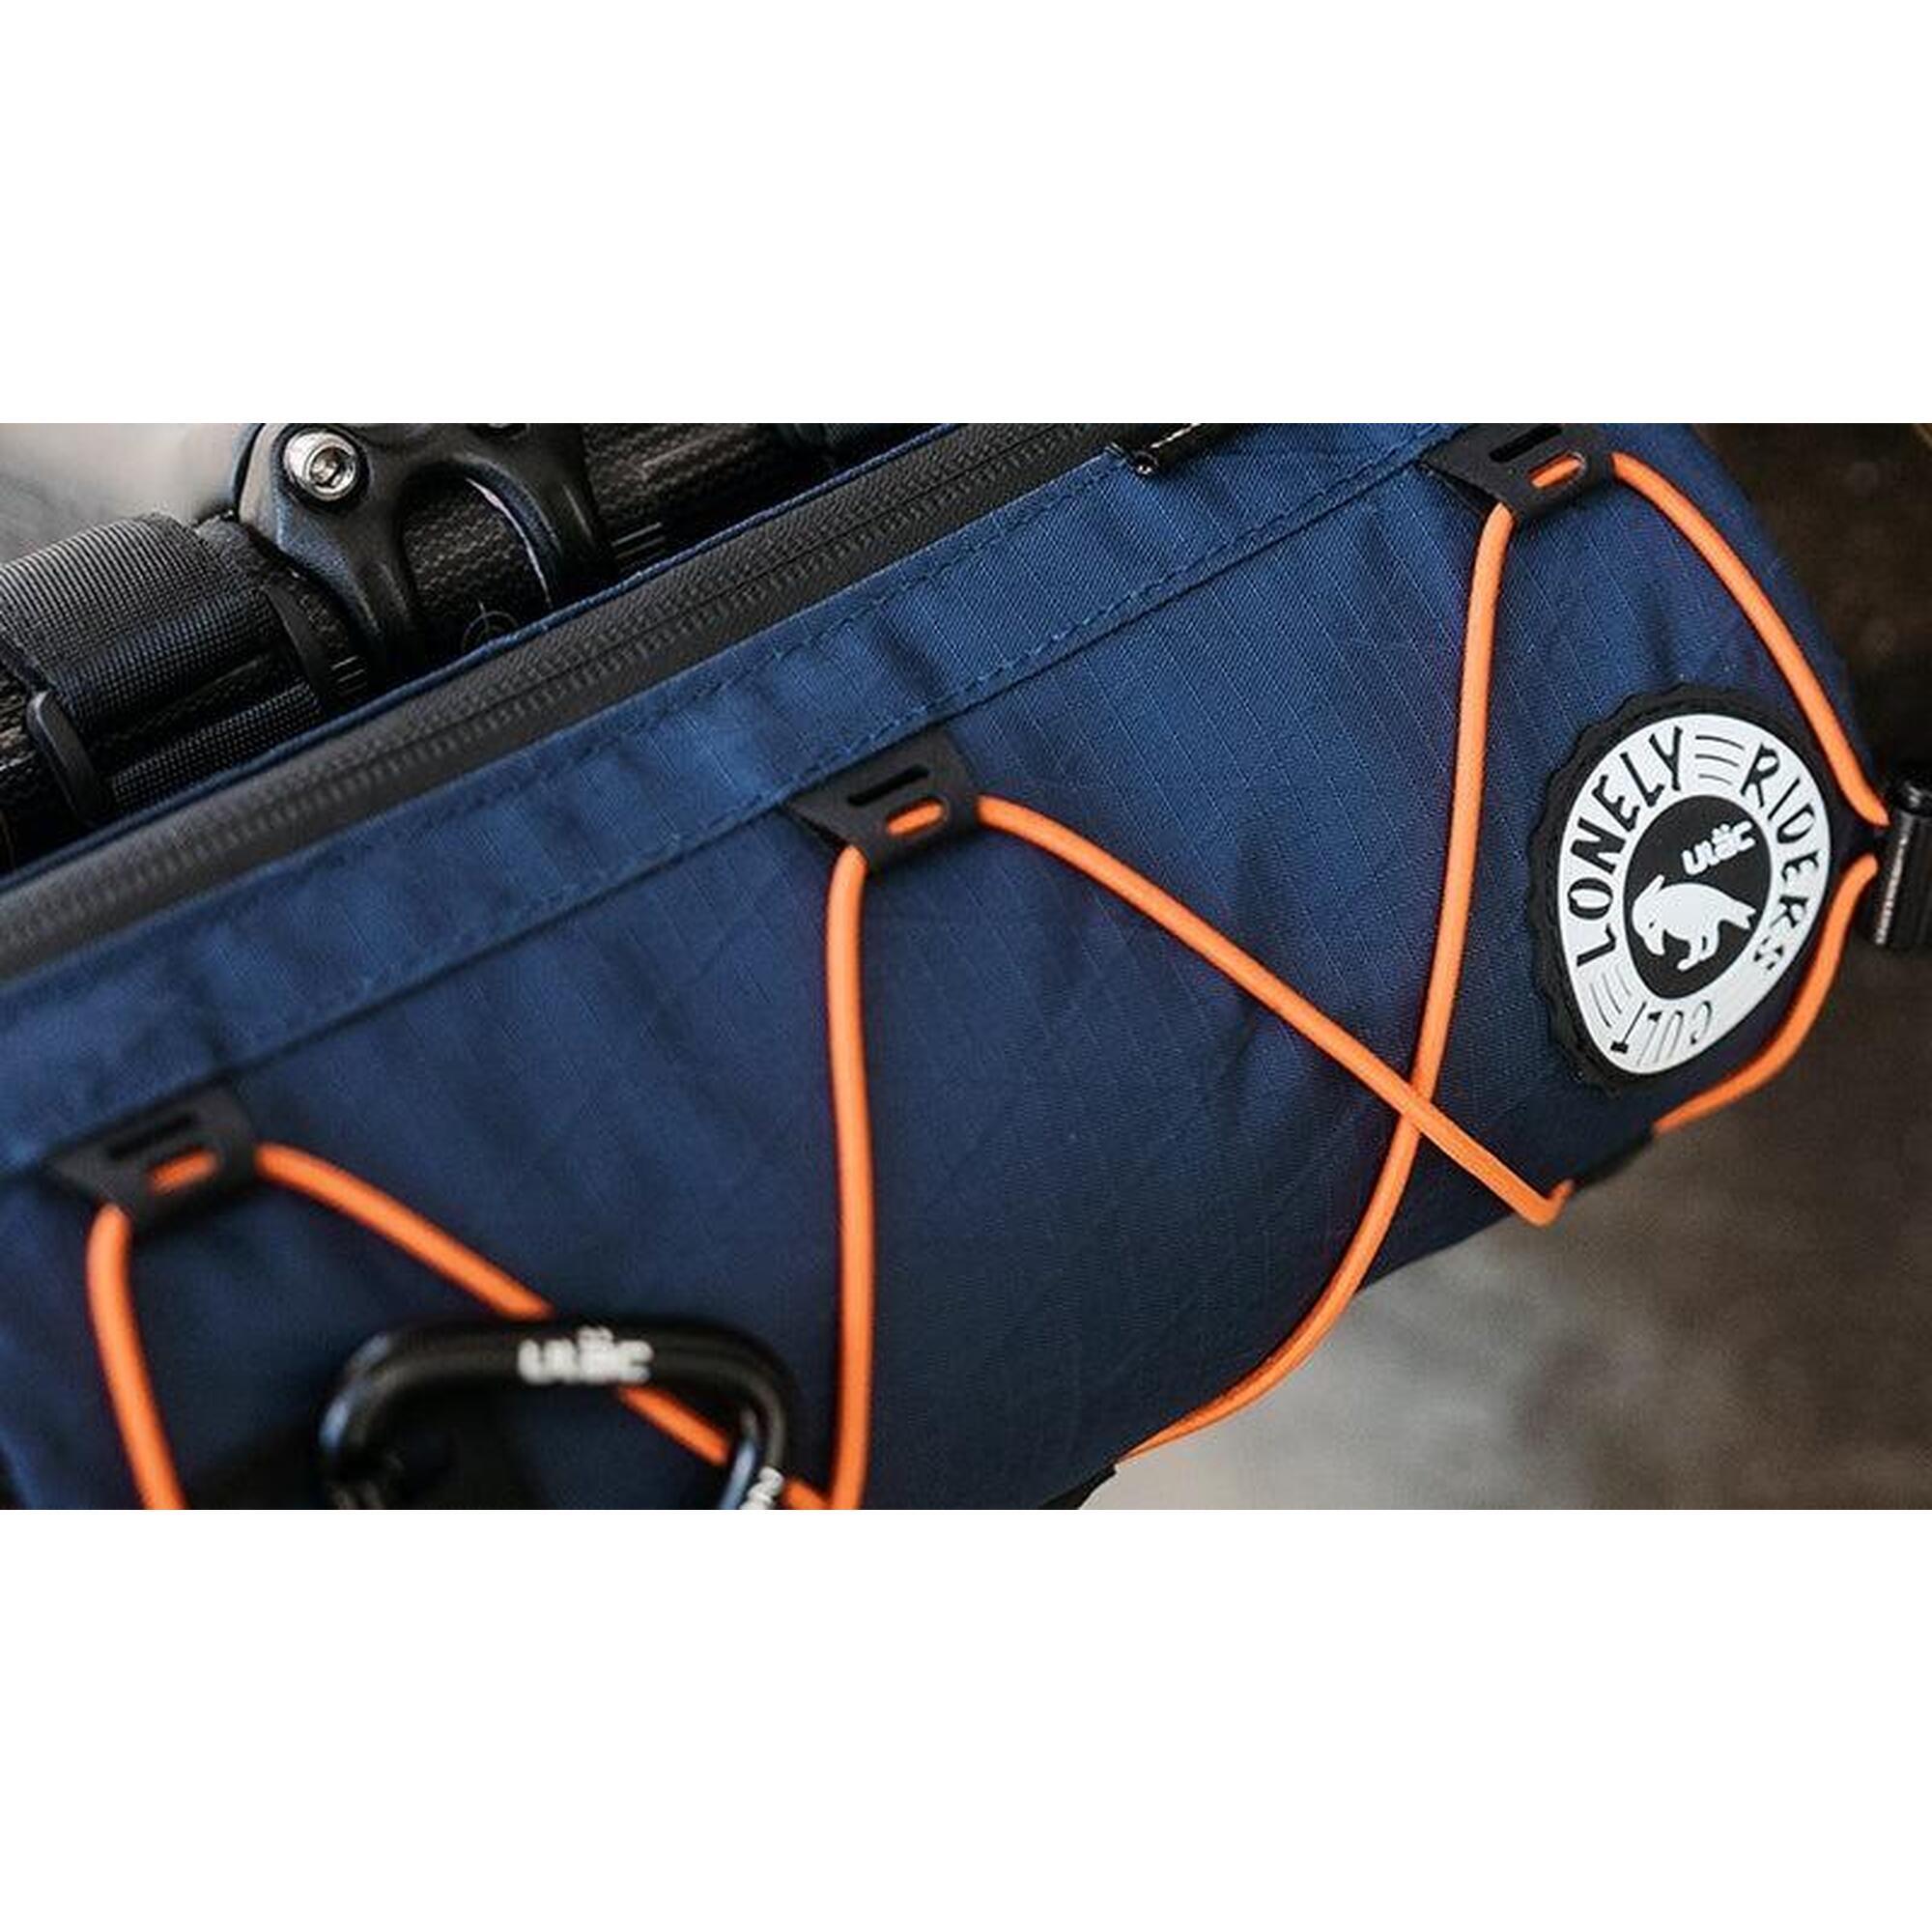 COURSIER GT FRONT CYCLING BAG 1.7L - NAVY